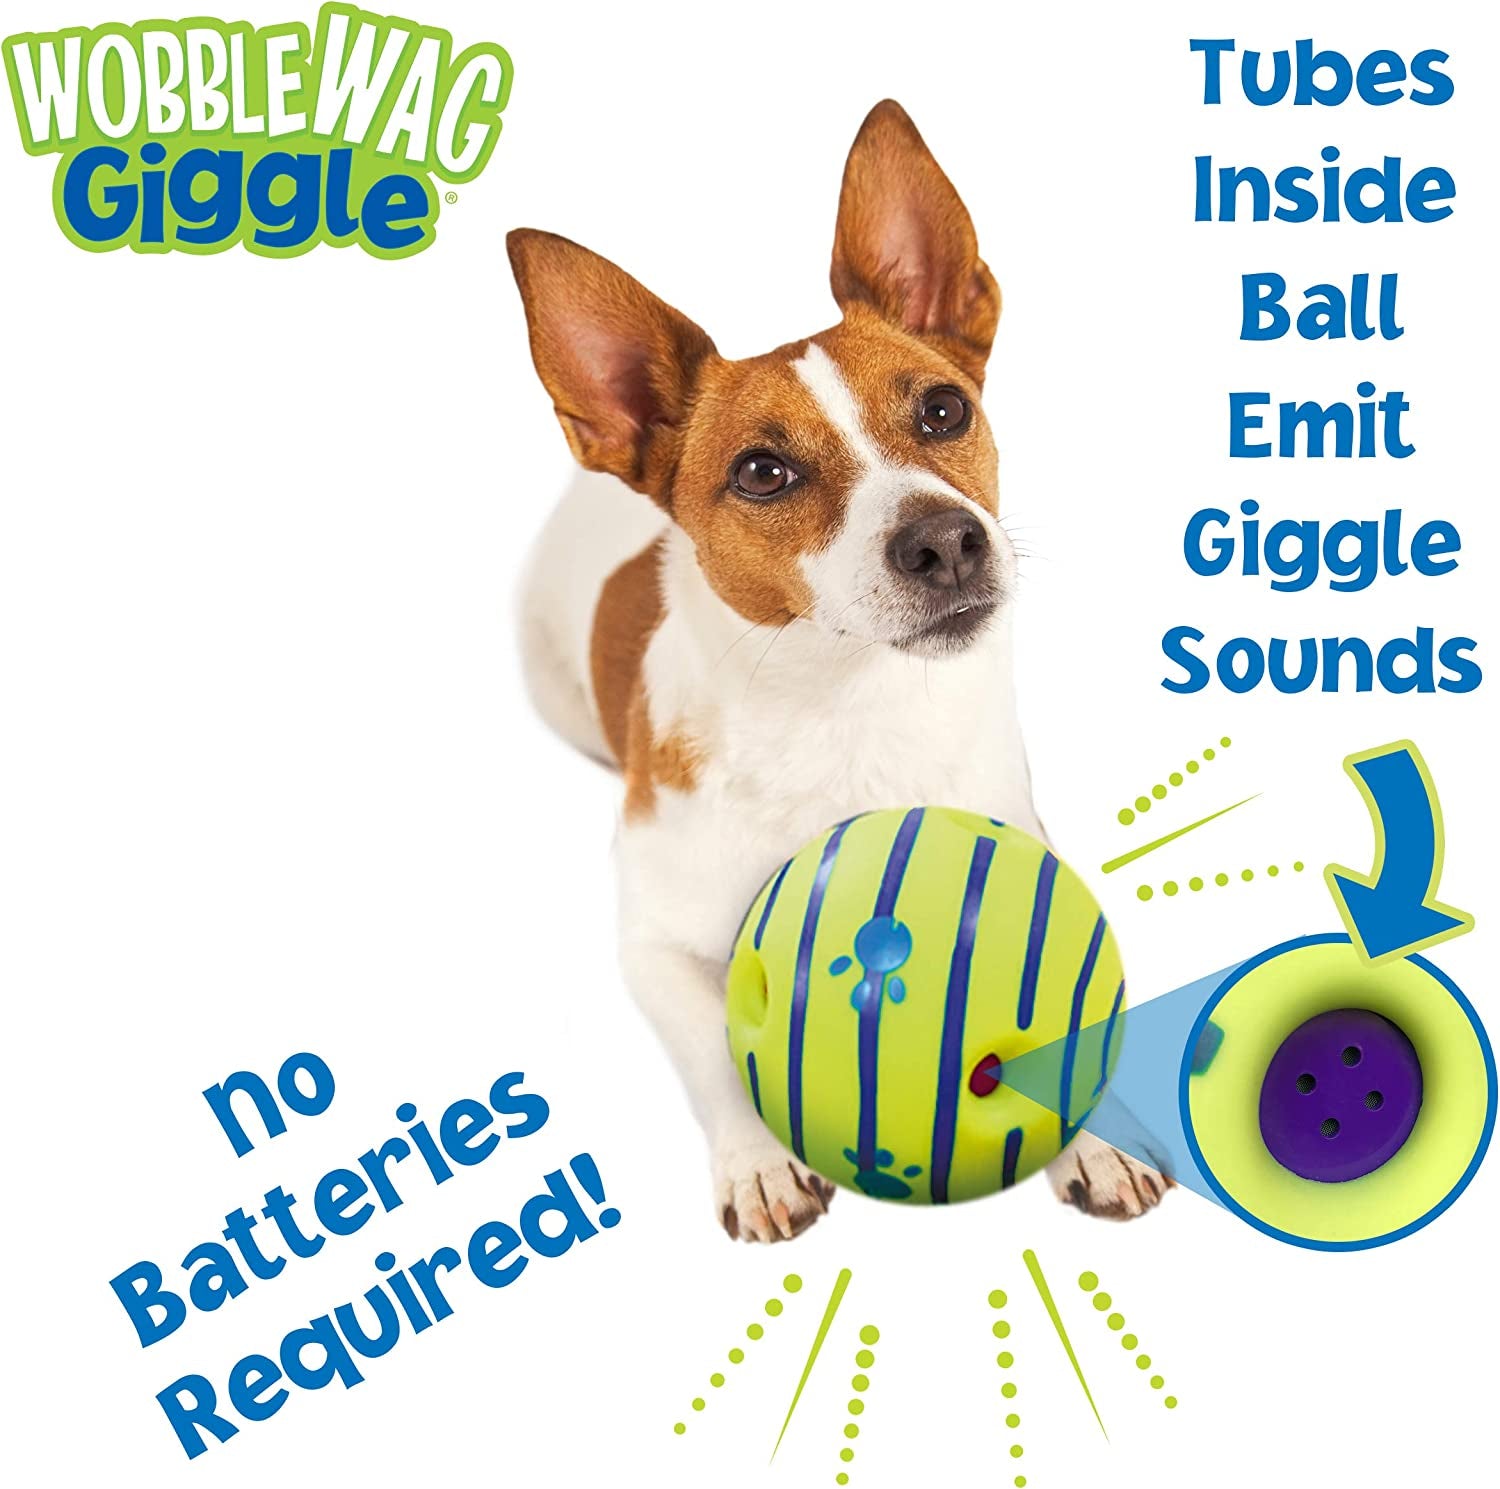 Wobble Wag Giggle Ball - Interactive Dog Toy with Fun Giggle Sounds